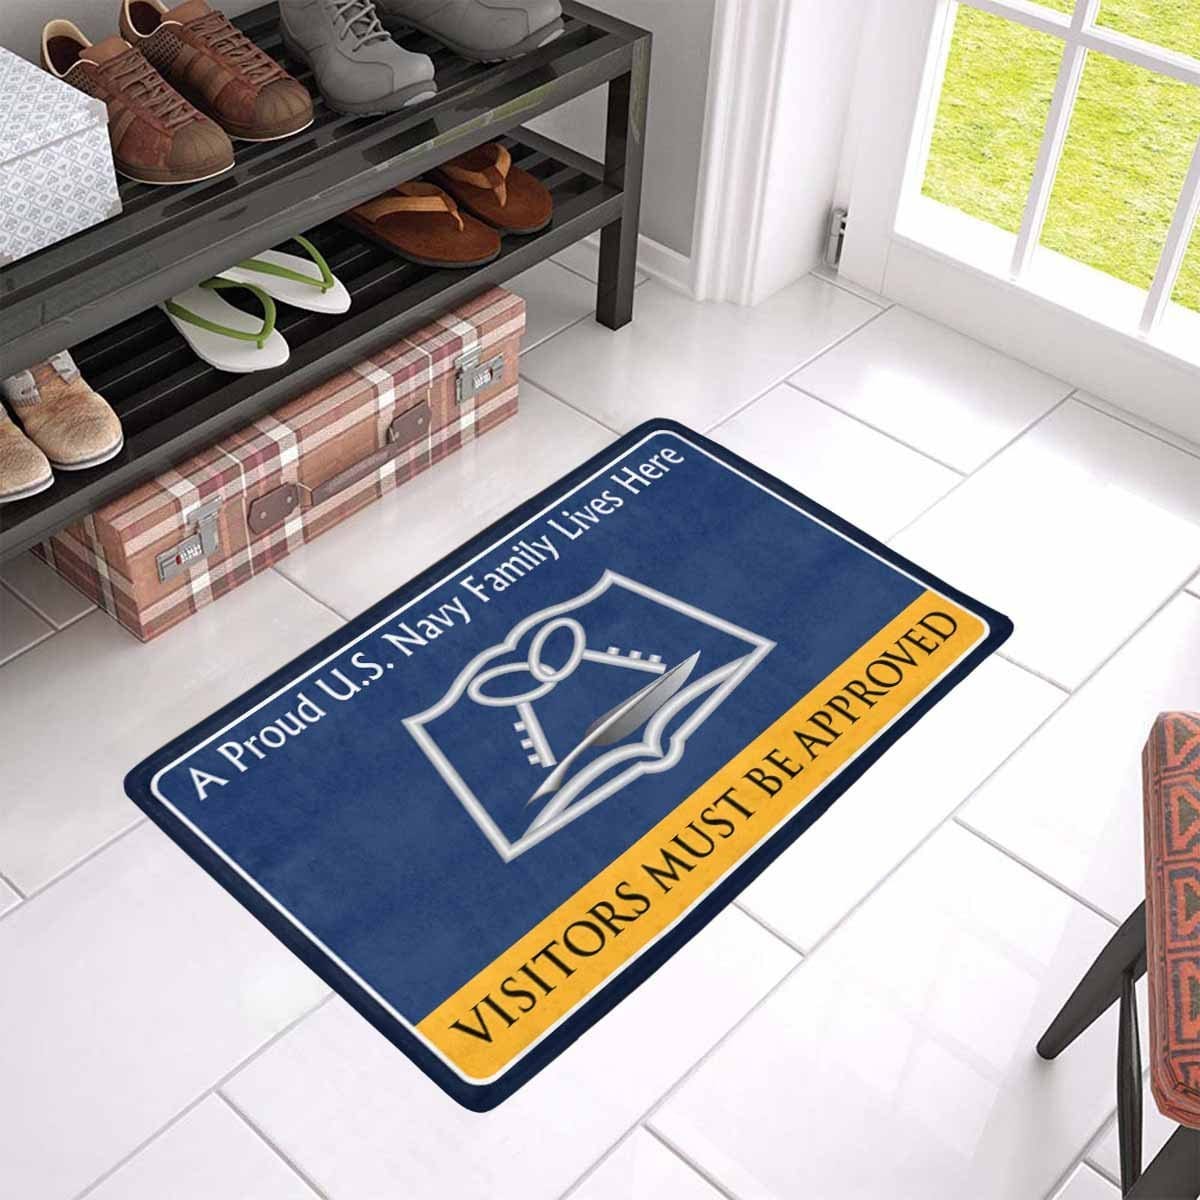 Navy Culinary Specialist Navy CS Family Doormat - Visitors must be approved (23,6 inches x 15,7 inches)-Doormat-Navy-Rate-Veterans Nation